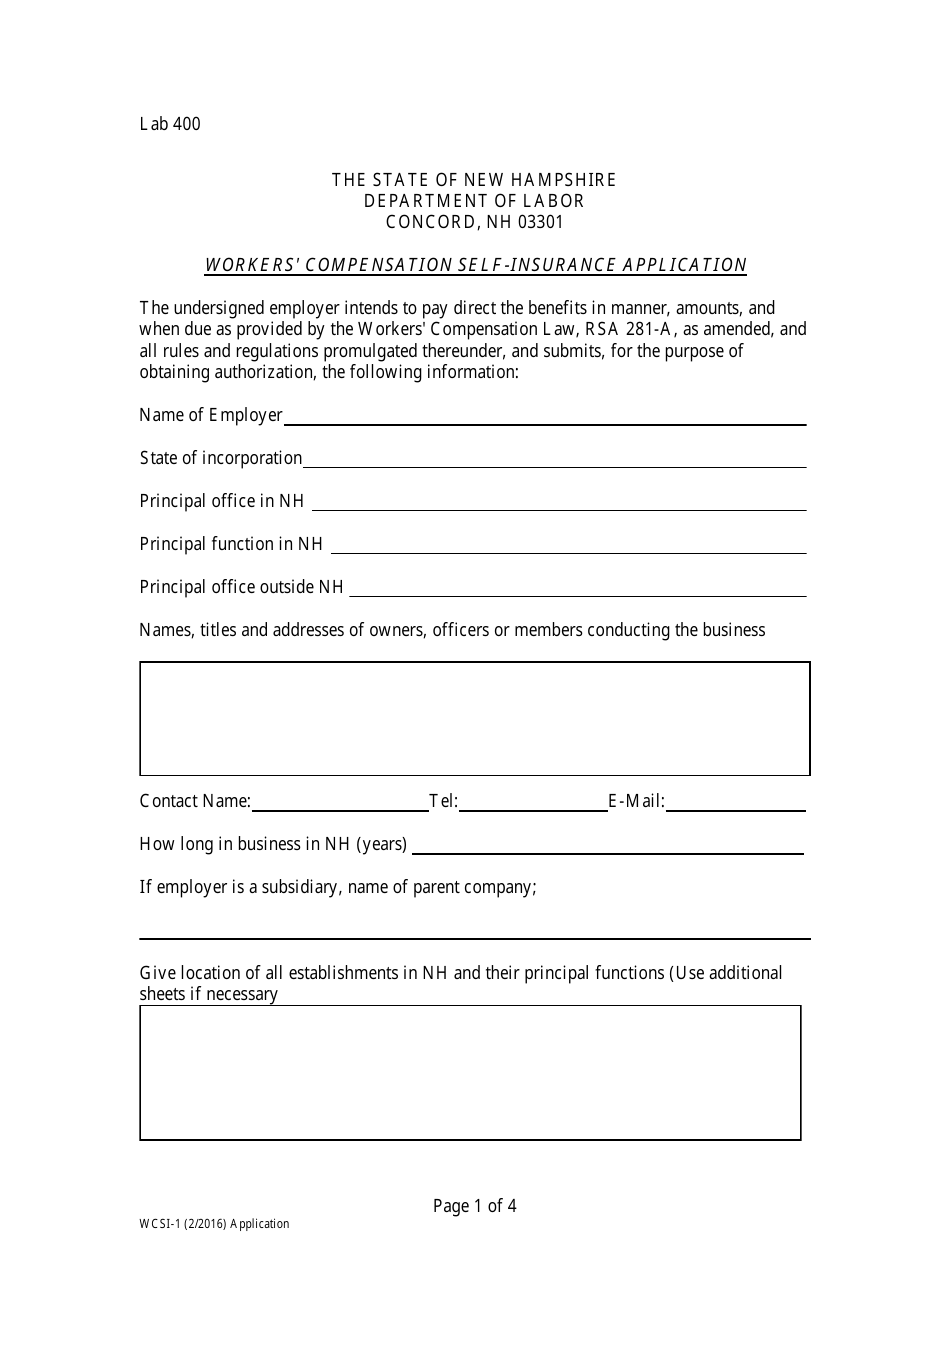 Form WCSI-1 Workers Compensation Self-insurance Application - New Hampshire, Page 1